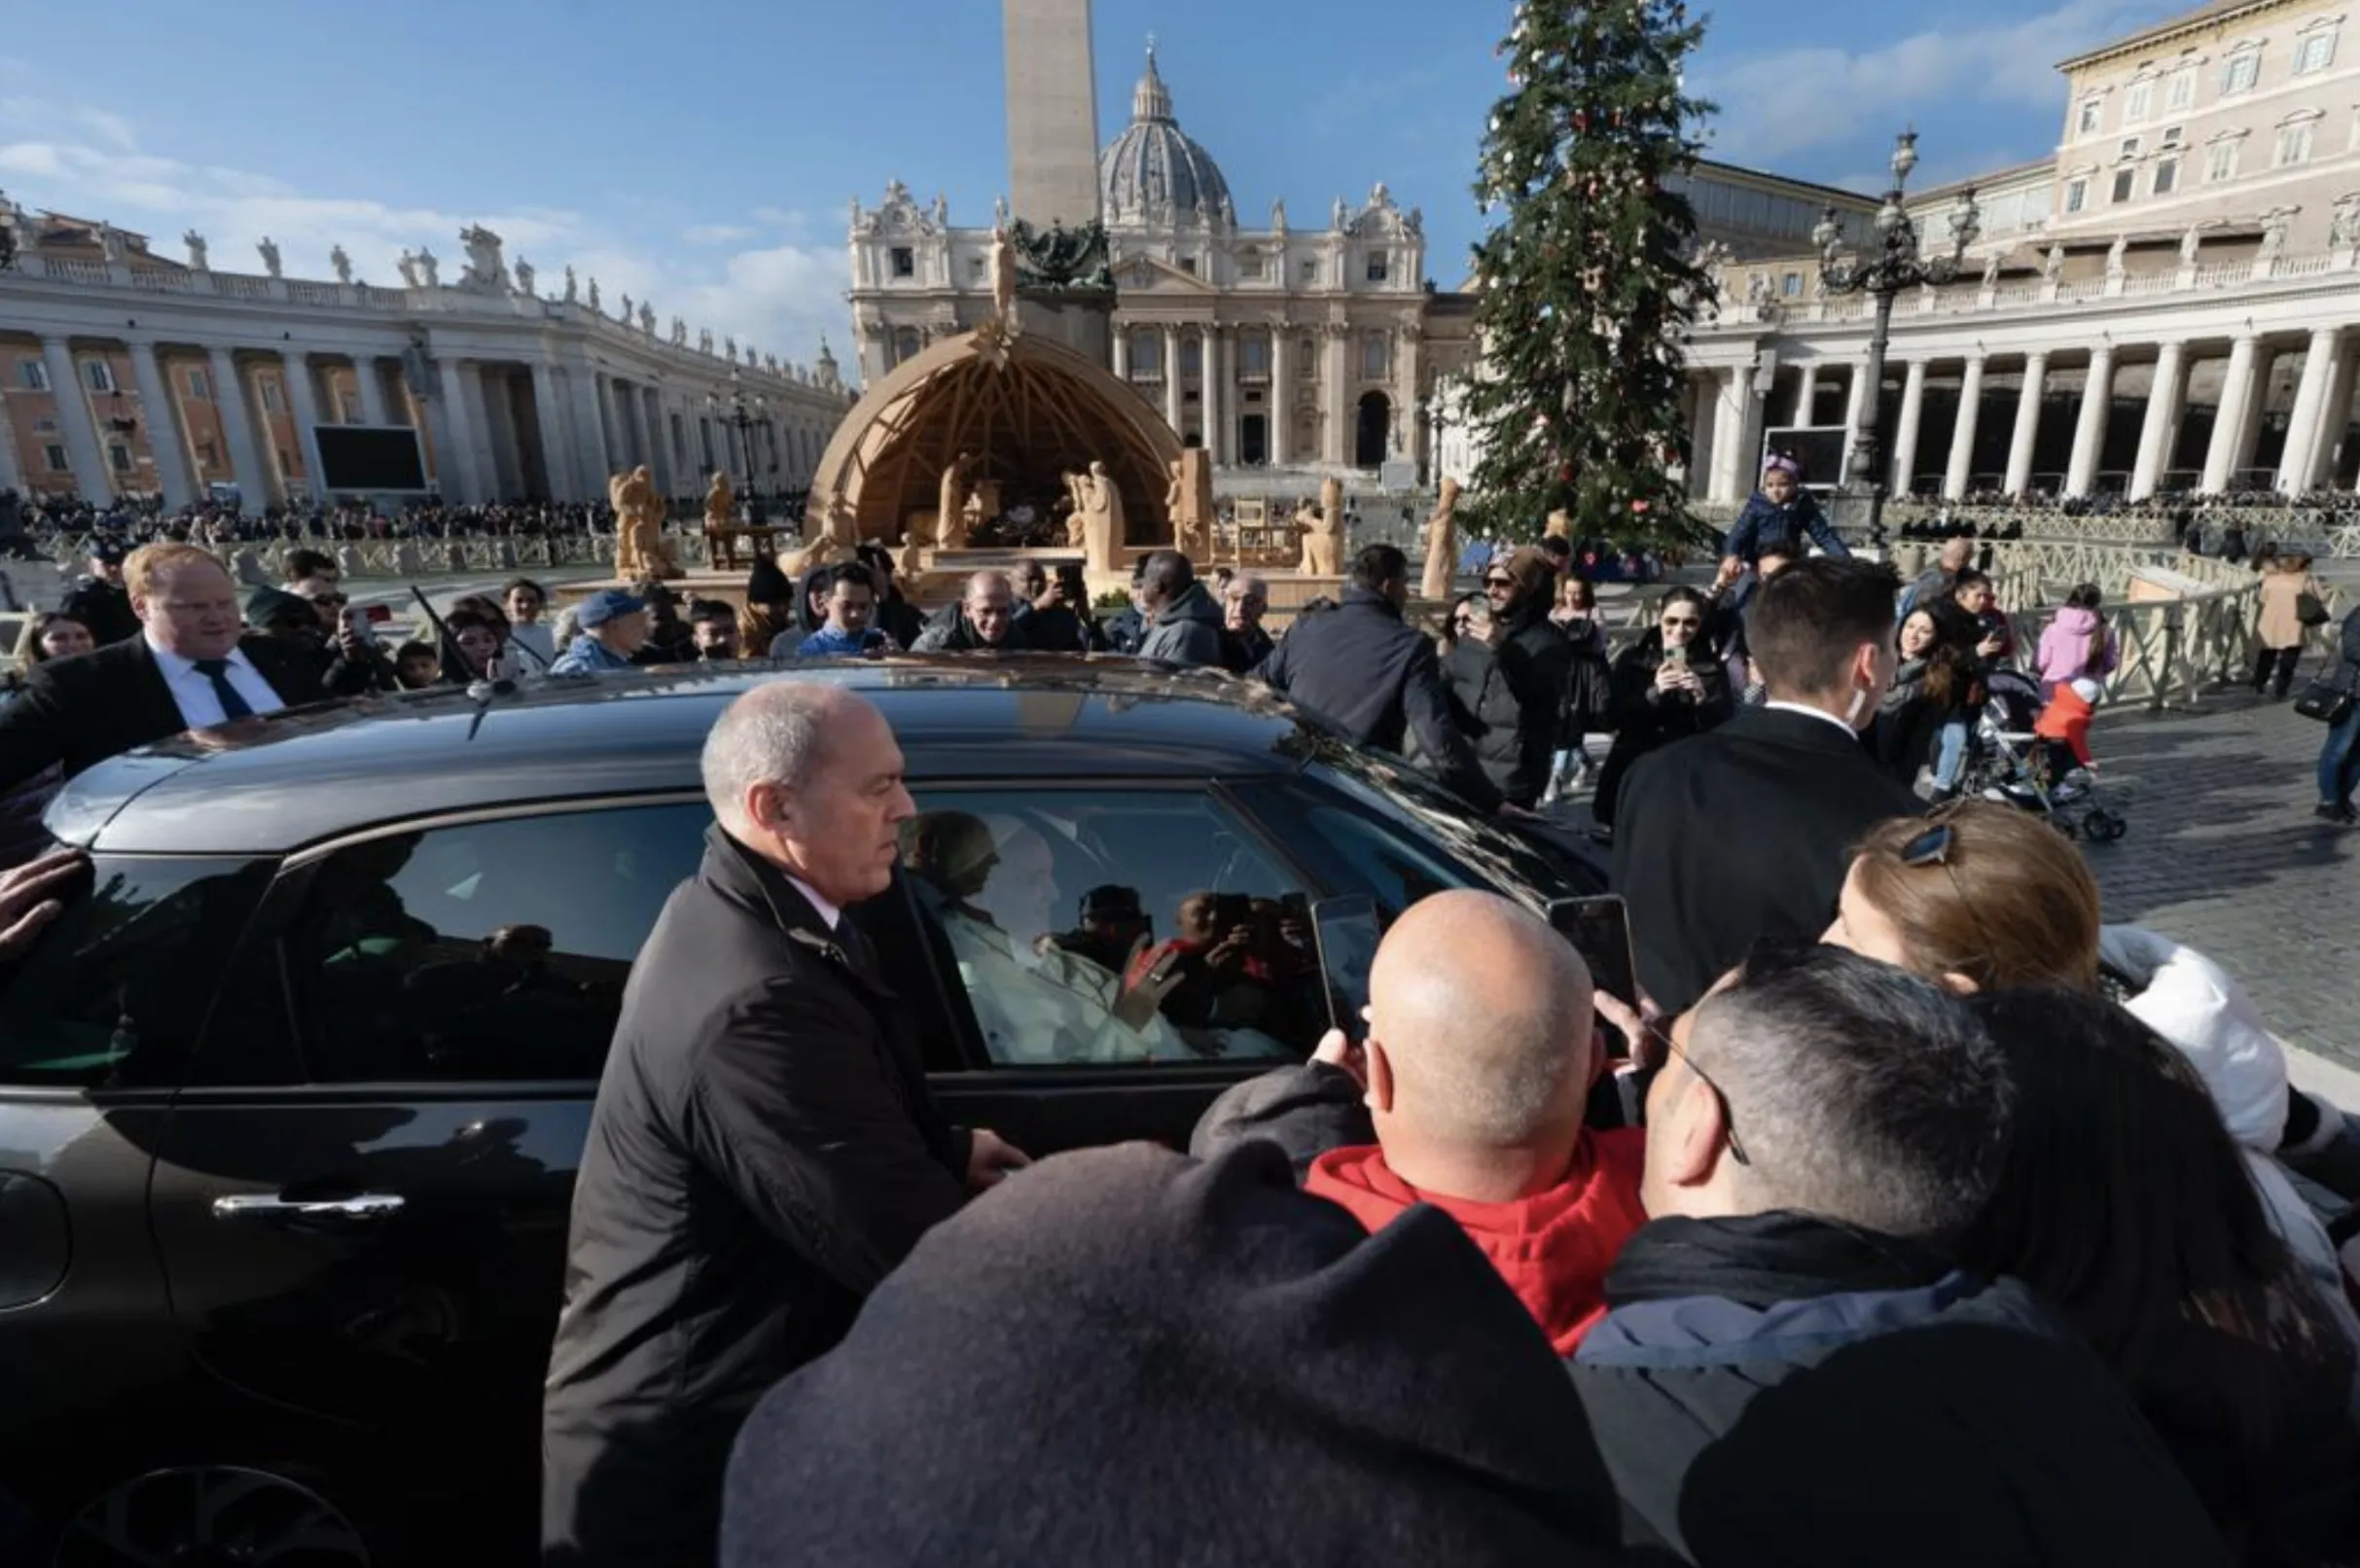 Pope Francis visiting this year's nativity scene on St. Peter's Square, Dec. 7, 2022. Vatican Media